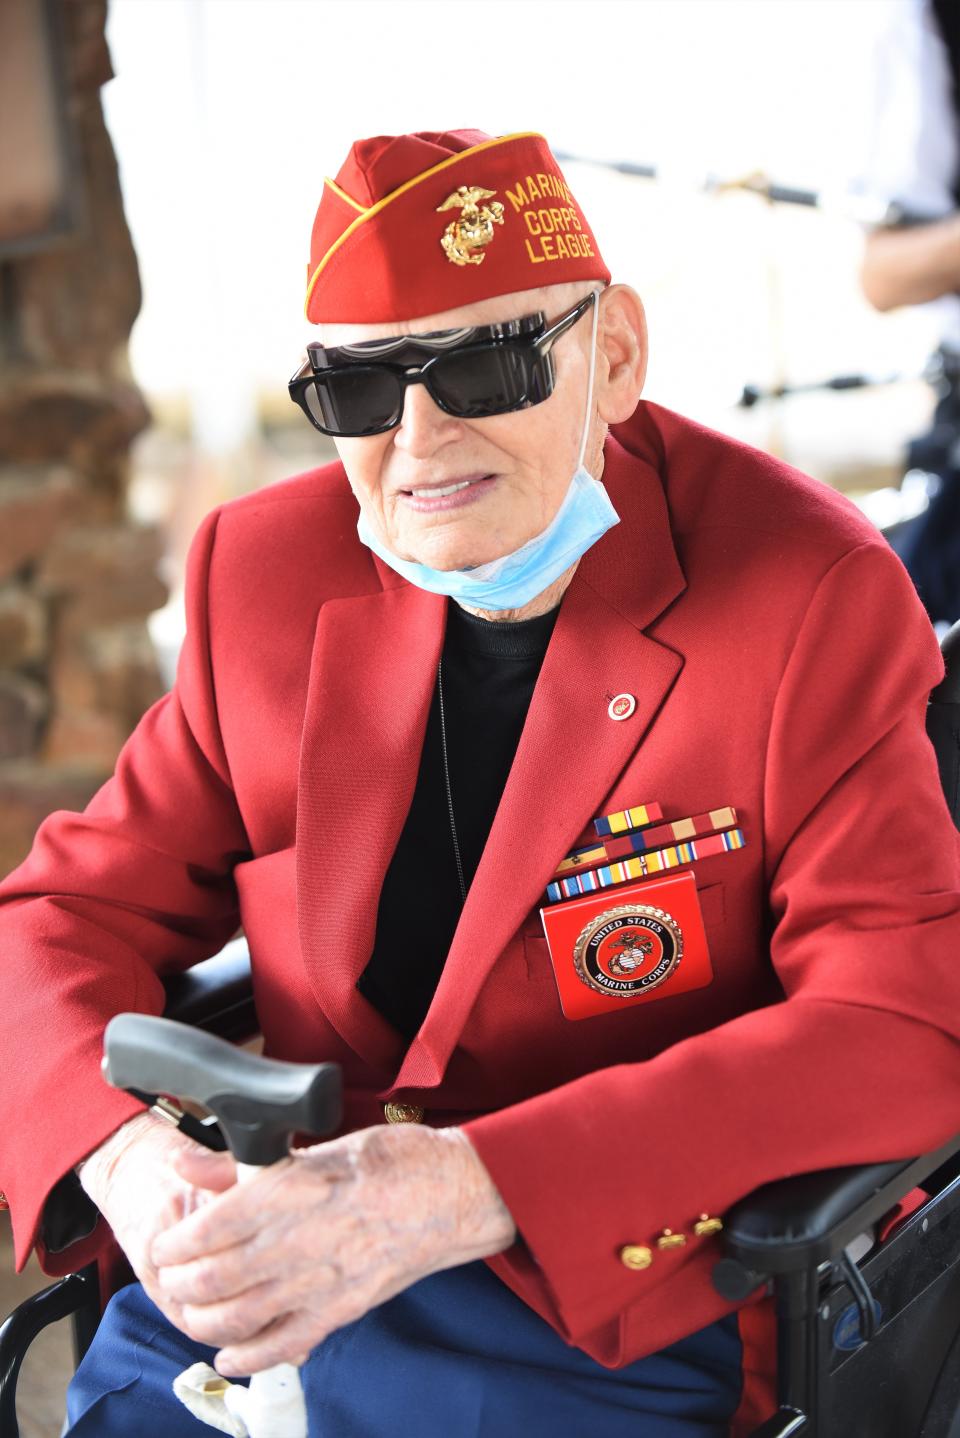 Veteran Paul Cross, 96, of Bastrop, served in World War II as a radio operator with the Third Marine Division.